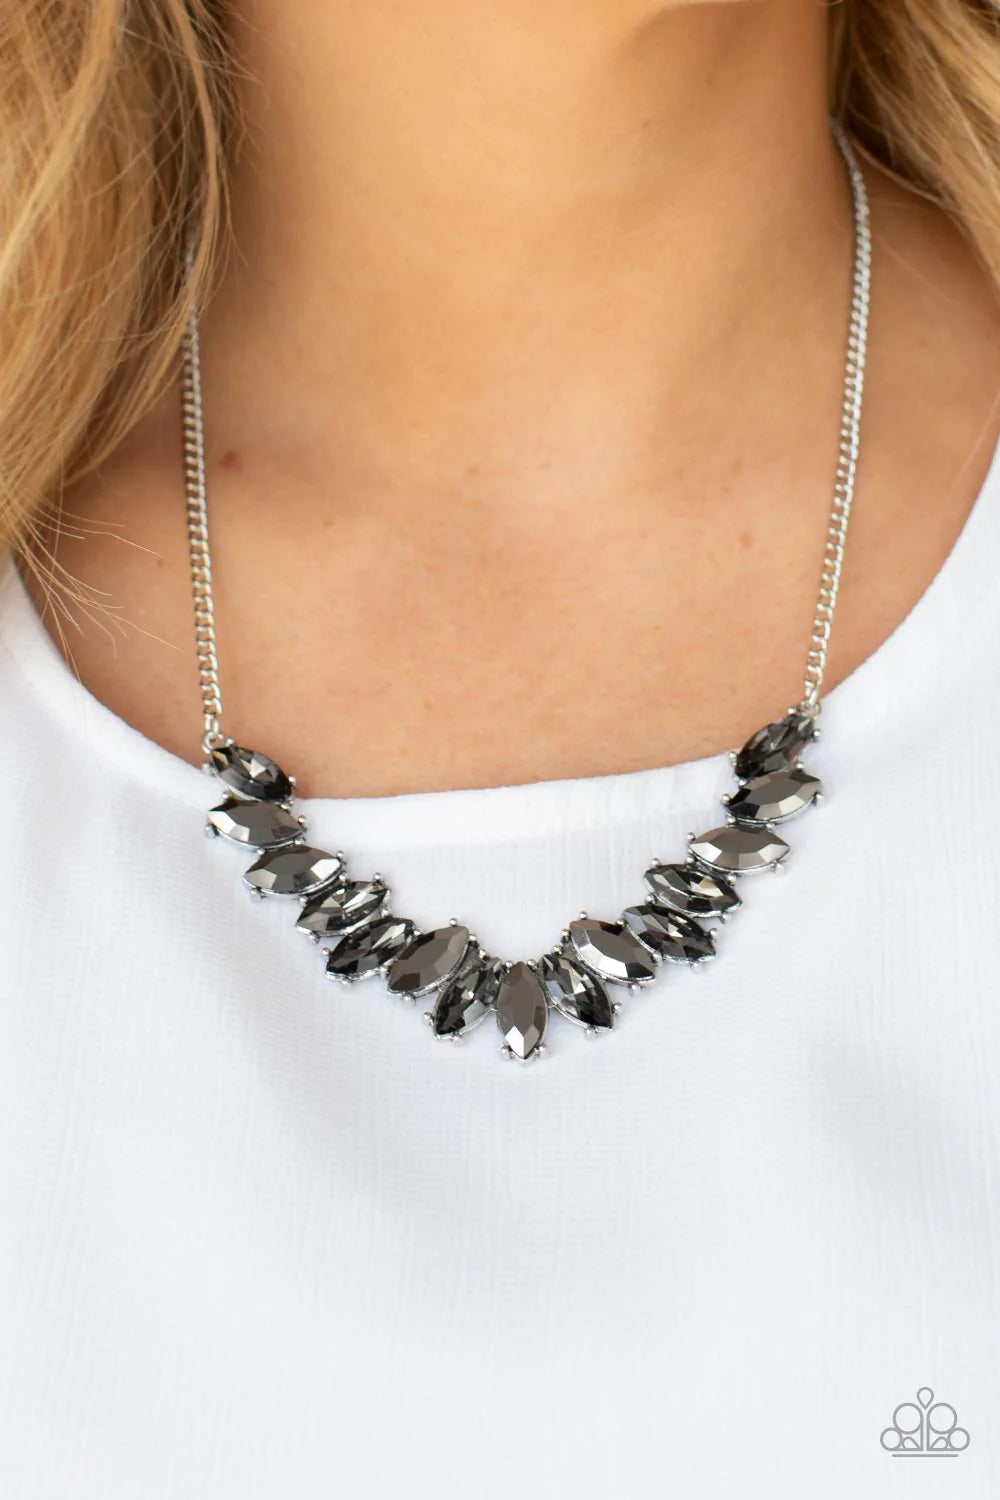 Paparazzi Accessories Galaxy Game-Changer - Silver Featuring pronged silver fittings, a sparkly series of smoky and hematite marquise cut rhinestones fan out below the collar for a stellar statement-making look. Features an adjustable clasp closure. Sold